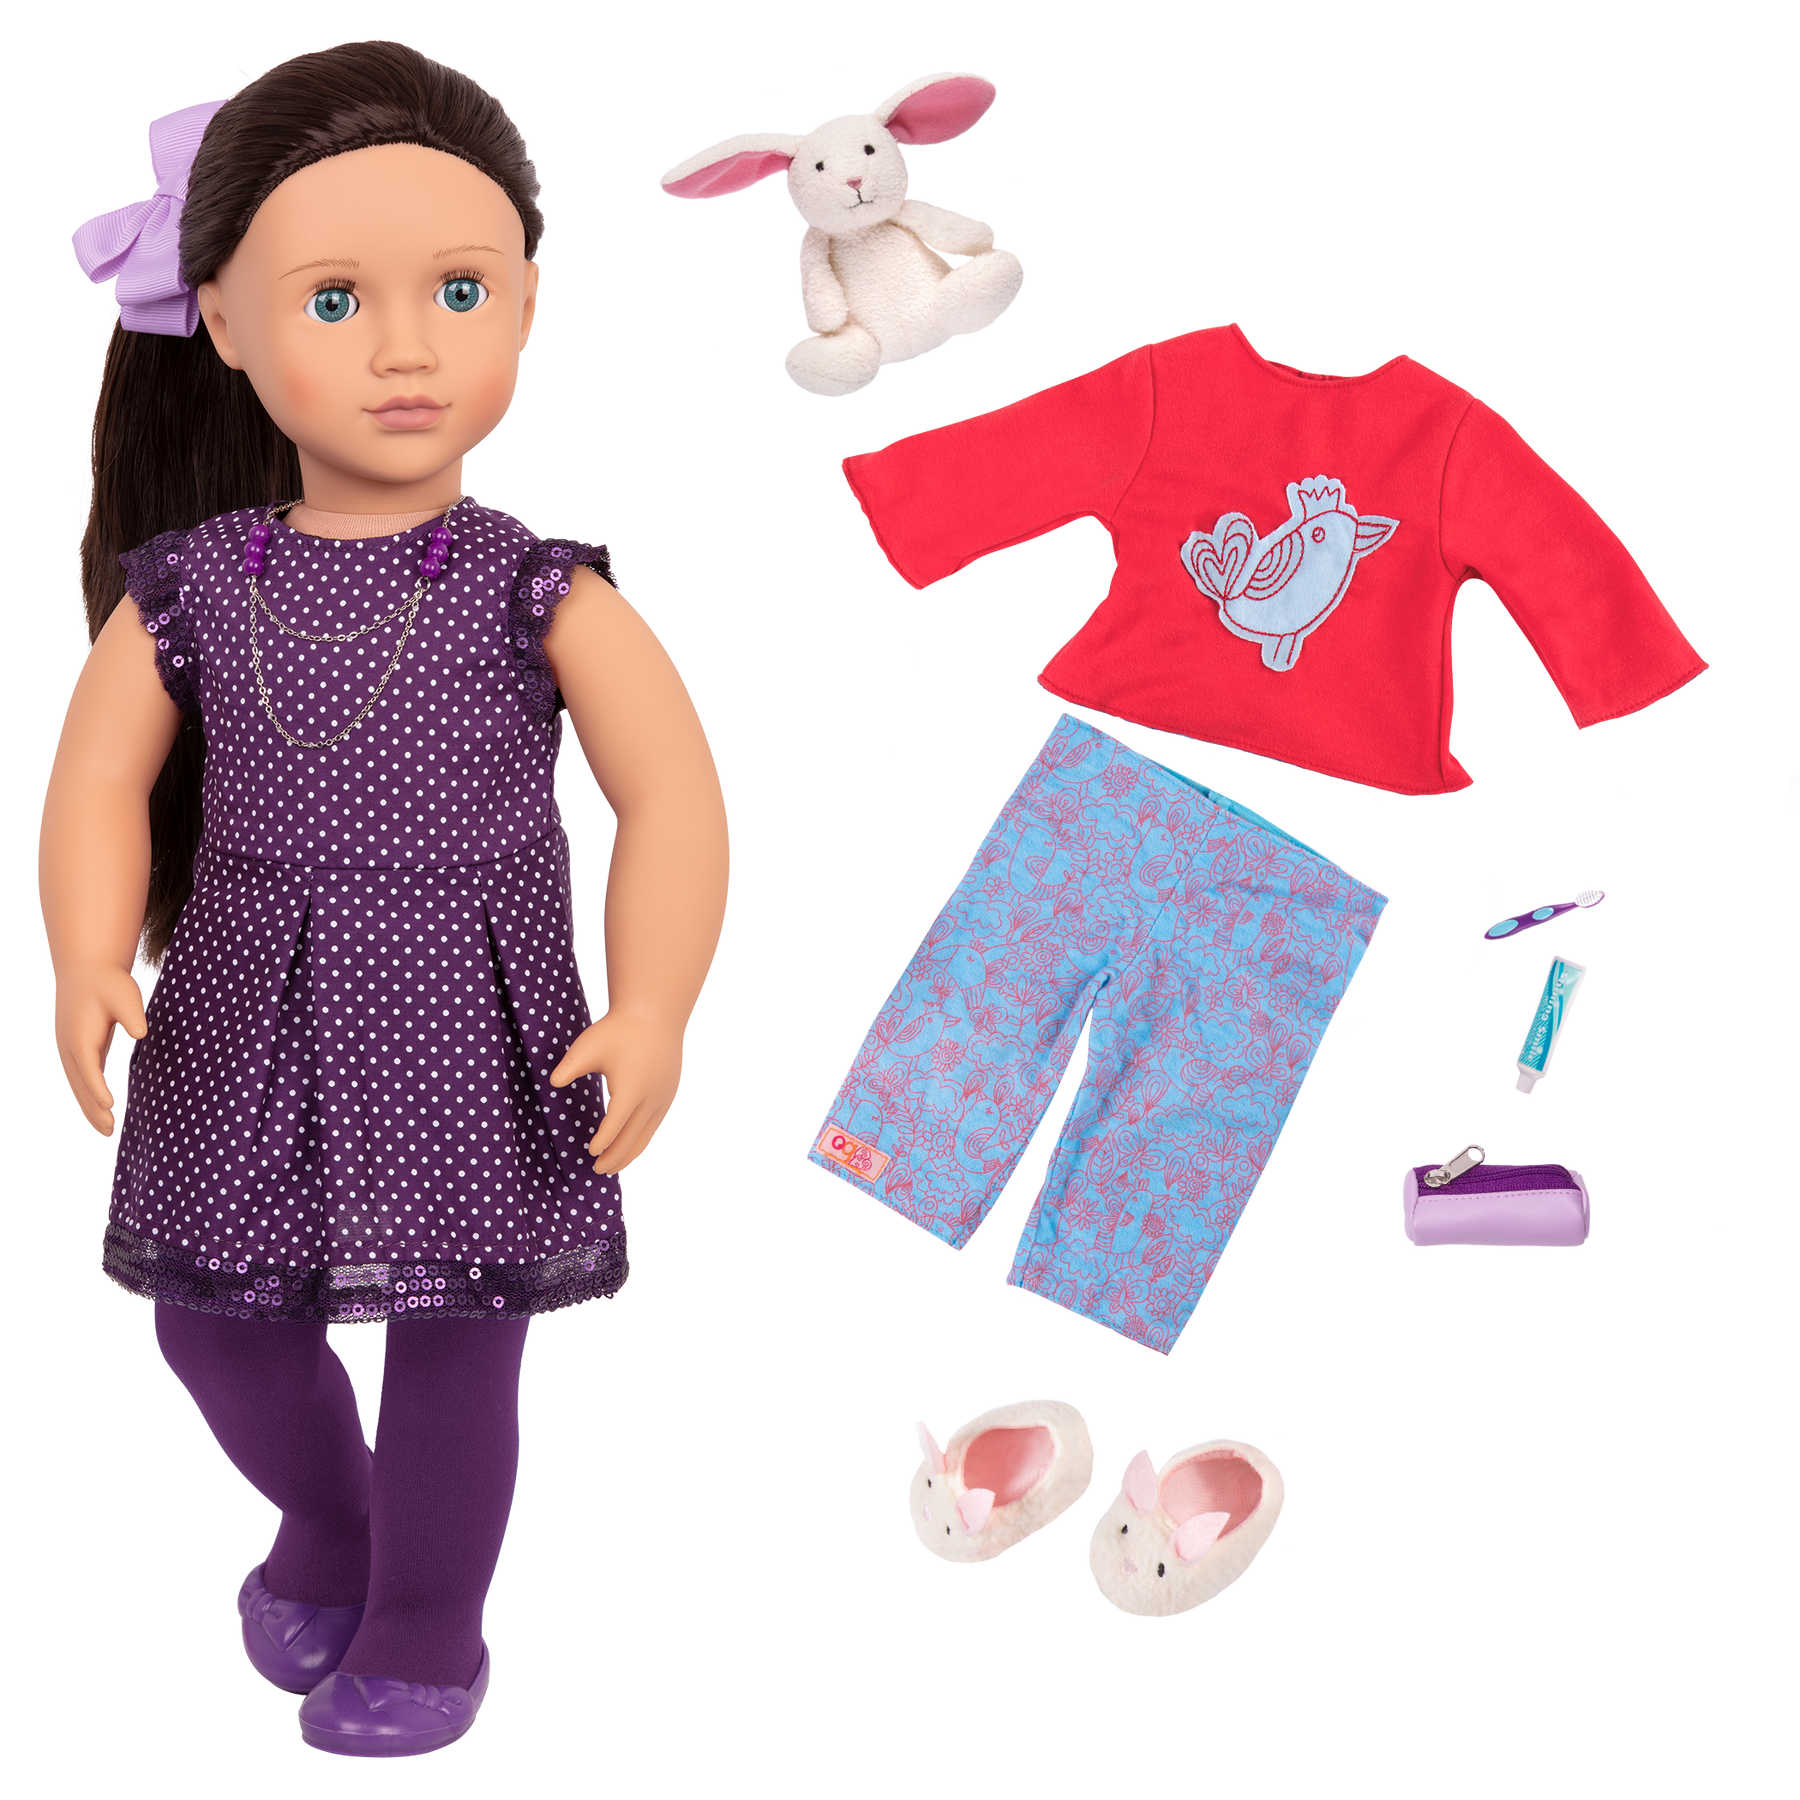 Willow, 18-inch Slumber Party Doll